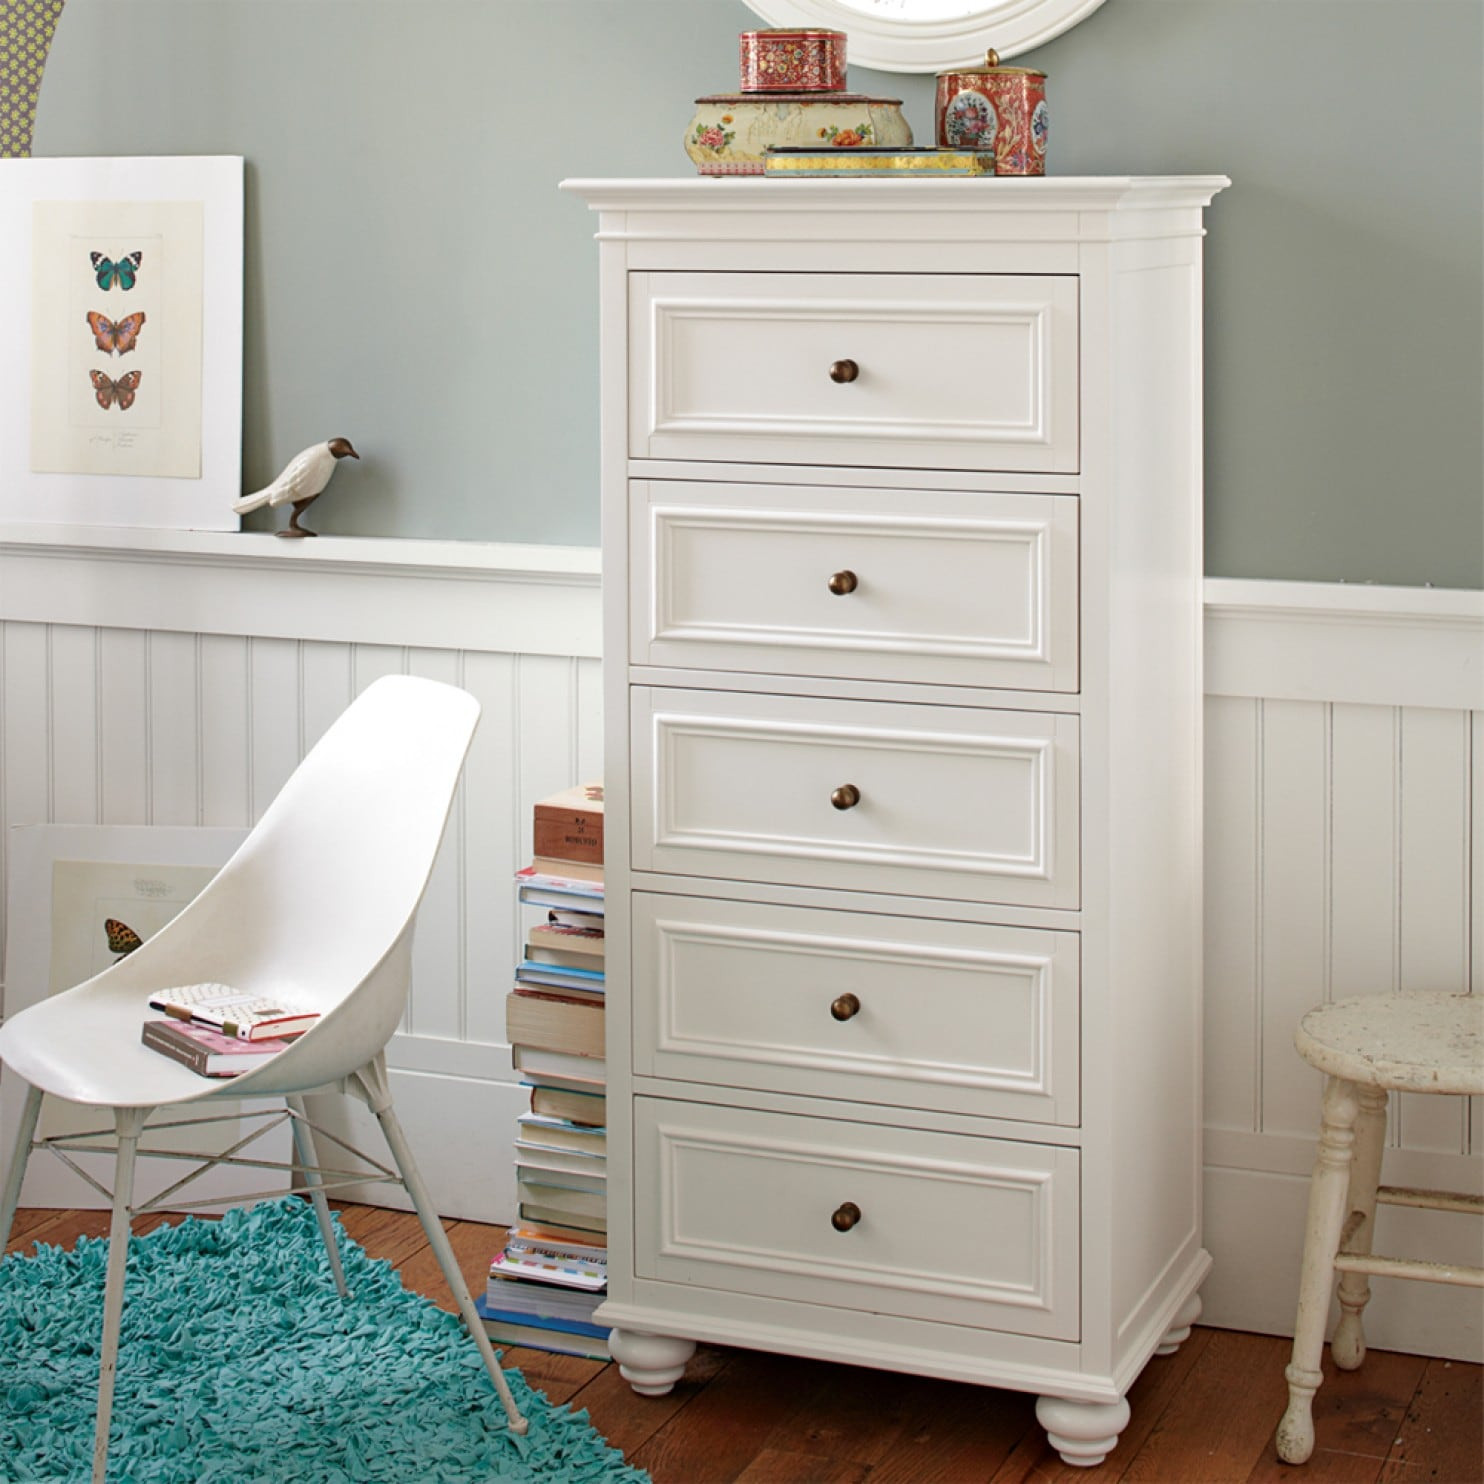 Small Bedroom Chest
 Creative dresser options for small spaces The Washington